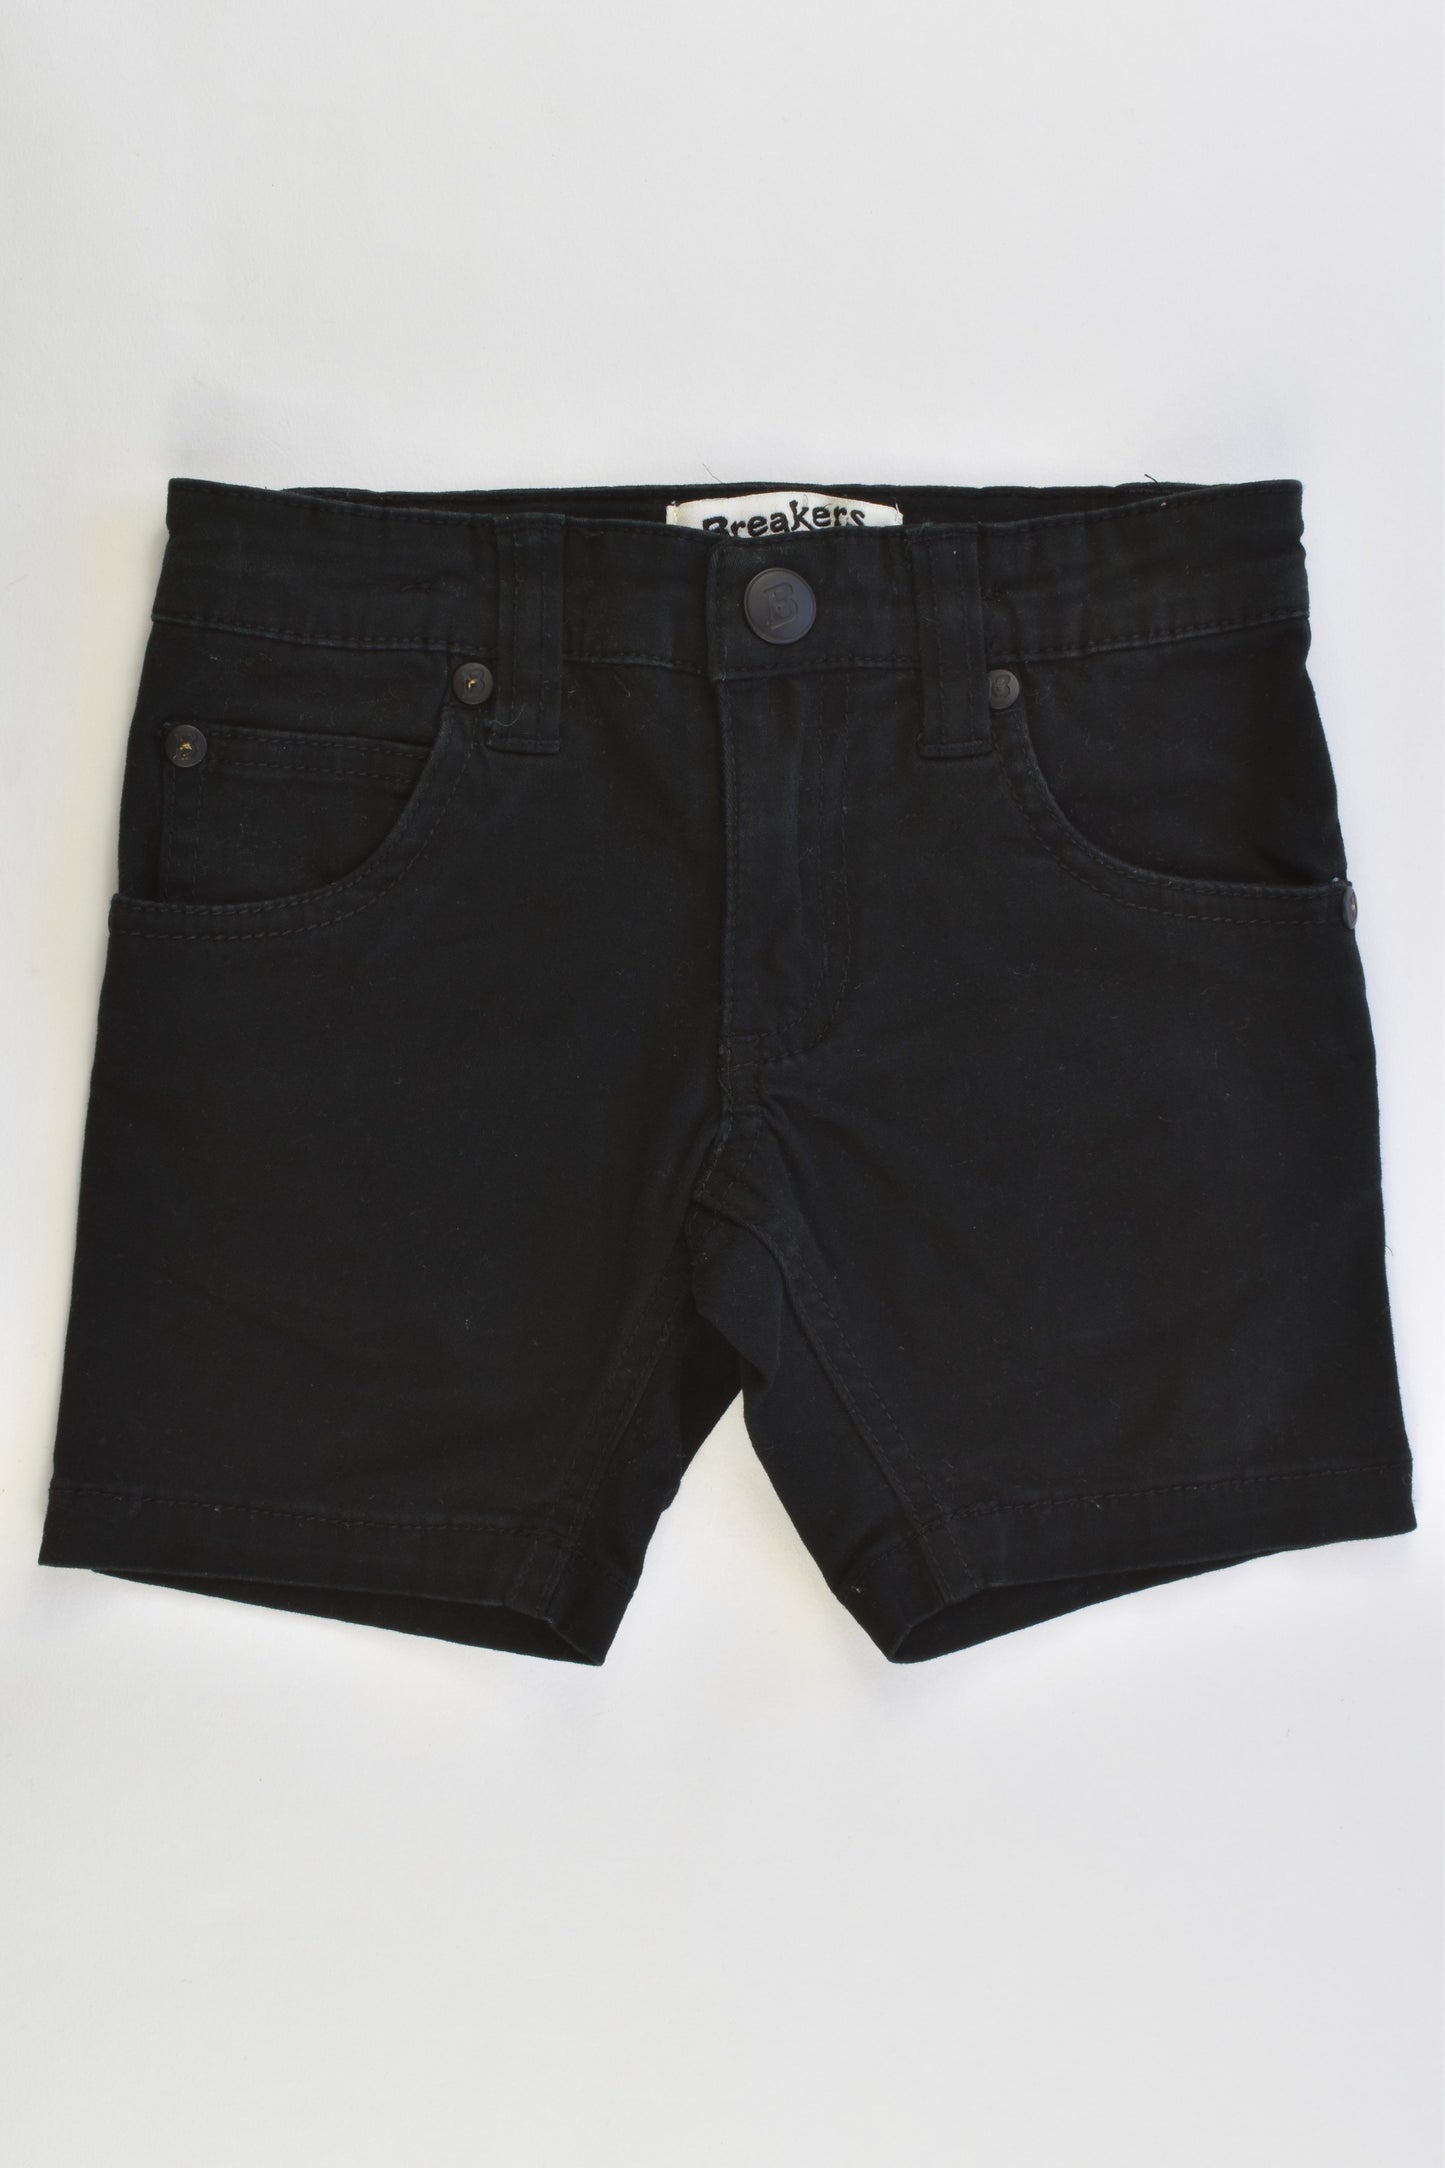 Breakers Size 3 Stretchy Shorts